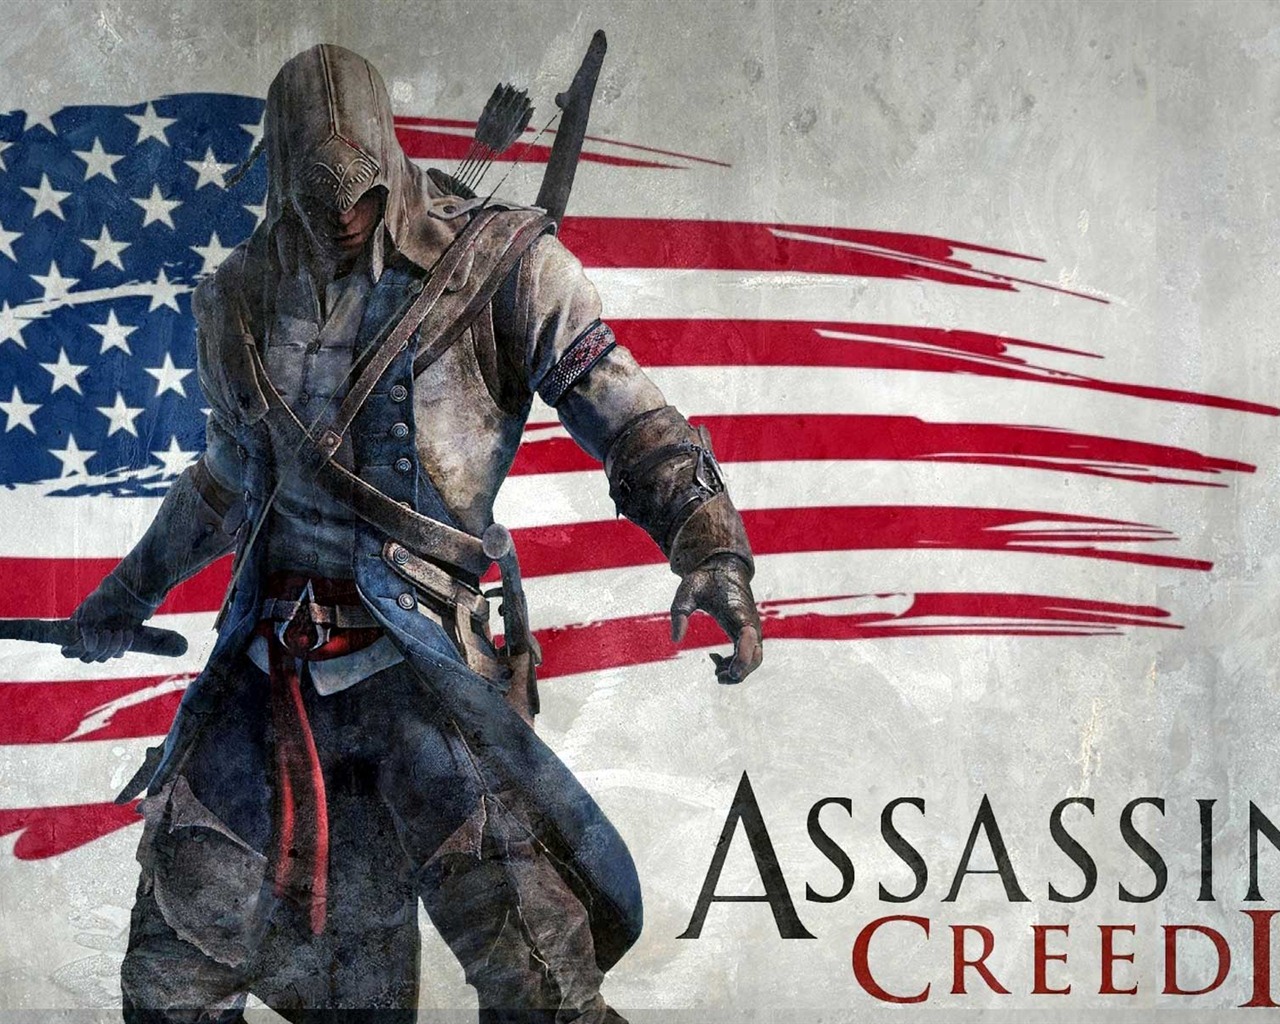 Assassin's Creed 3 HD wallpapers #12 - 1280x1024